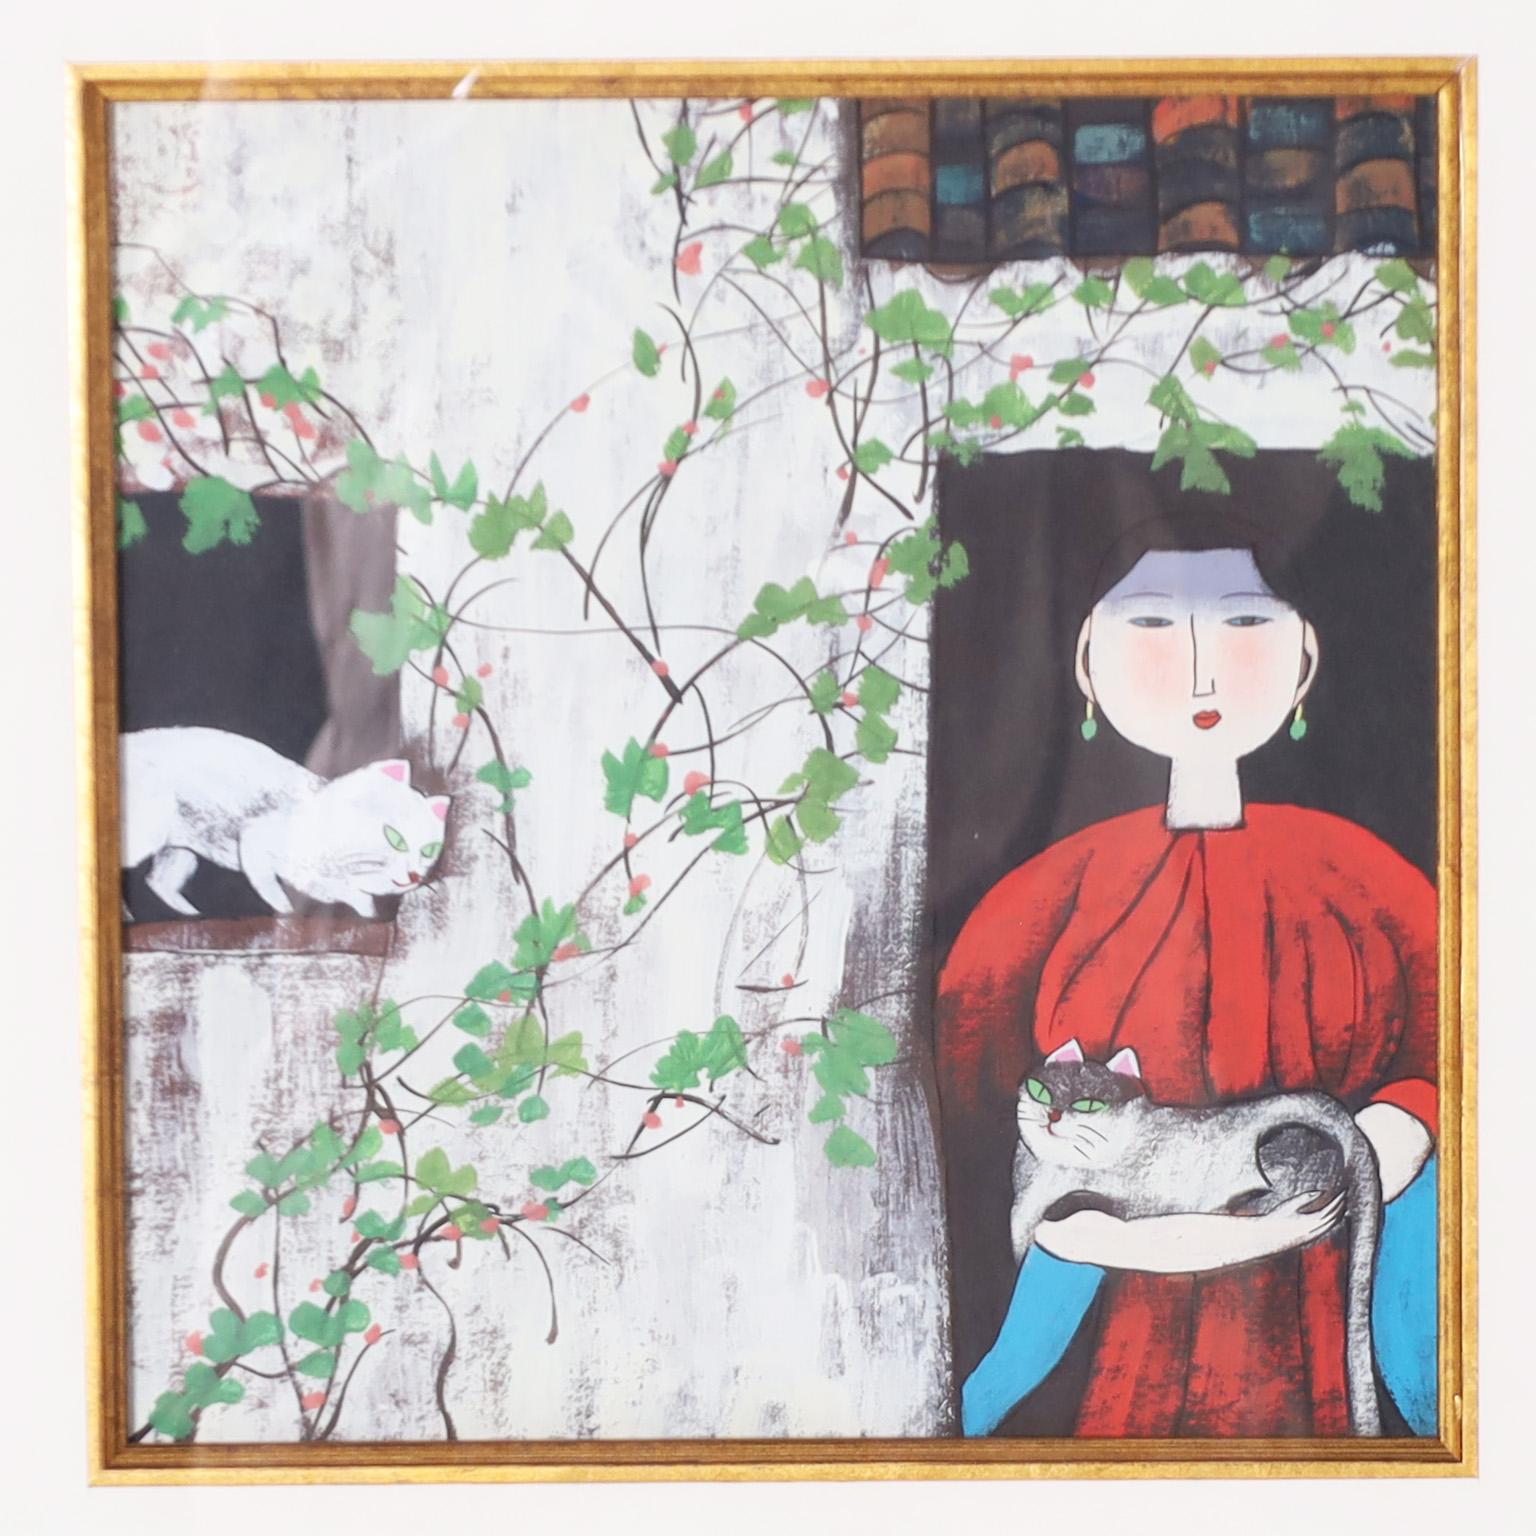 Intriguing pair of modern Chinese paintings executed with gouache on paper in a distinctive colorful naive Asian style depicting women with cats in a garden setting. Both presented in a common gilt wood frame under glass.